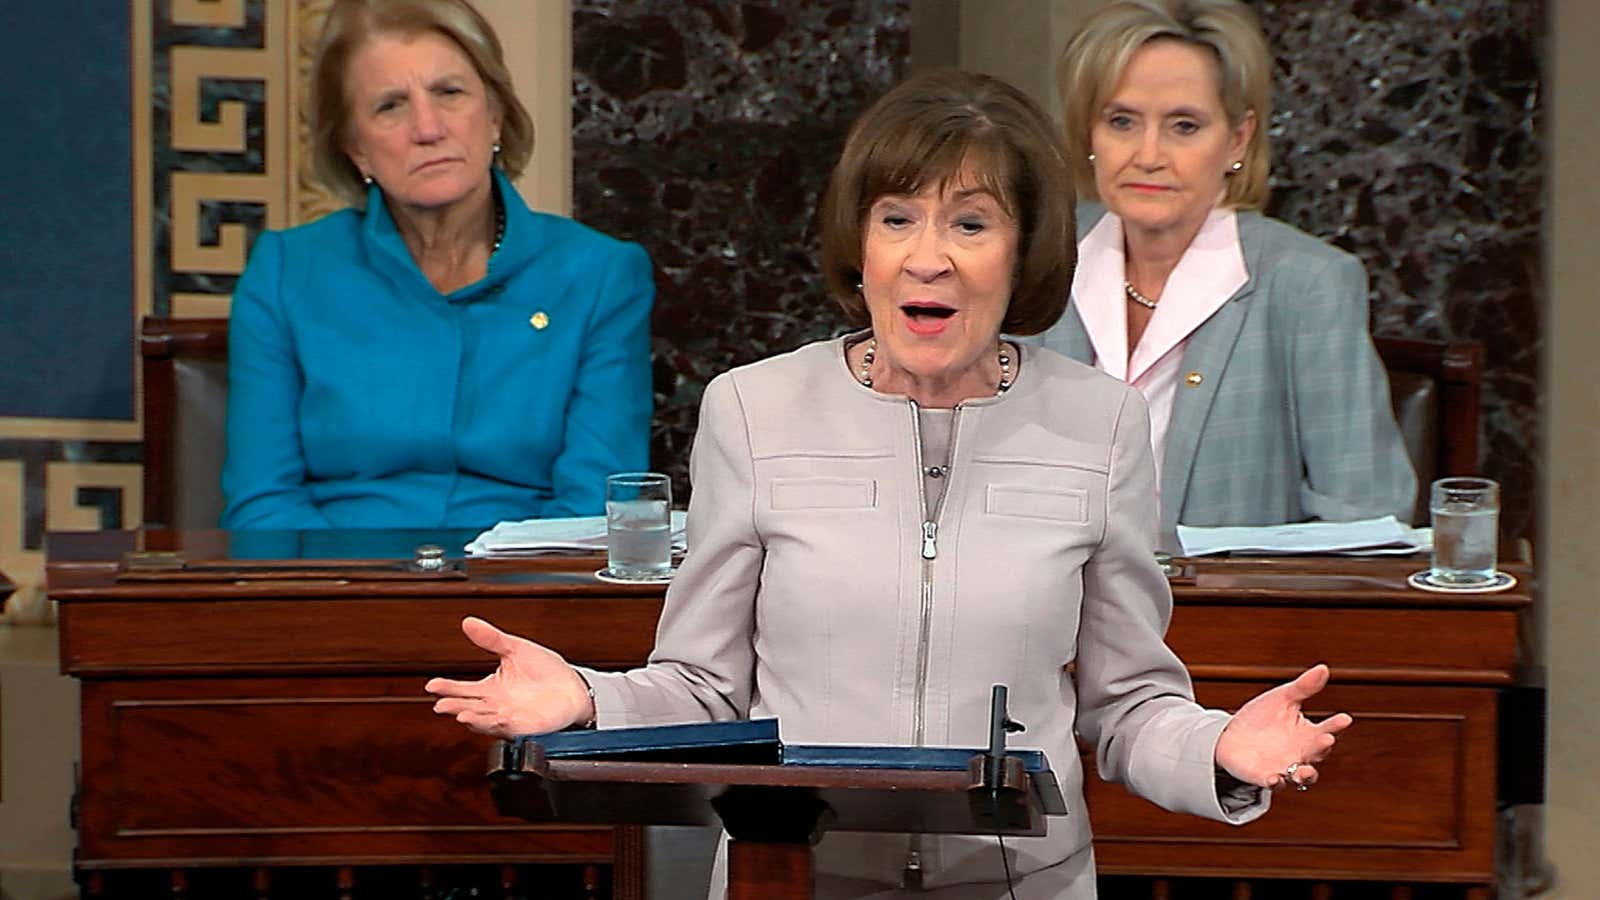 Collins believes Kavanaugh will uphold Roe v. Wade’s precedence.